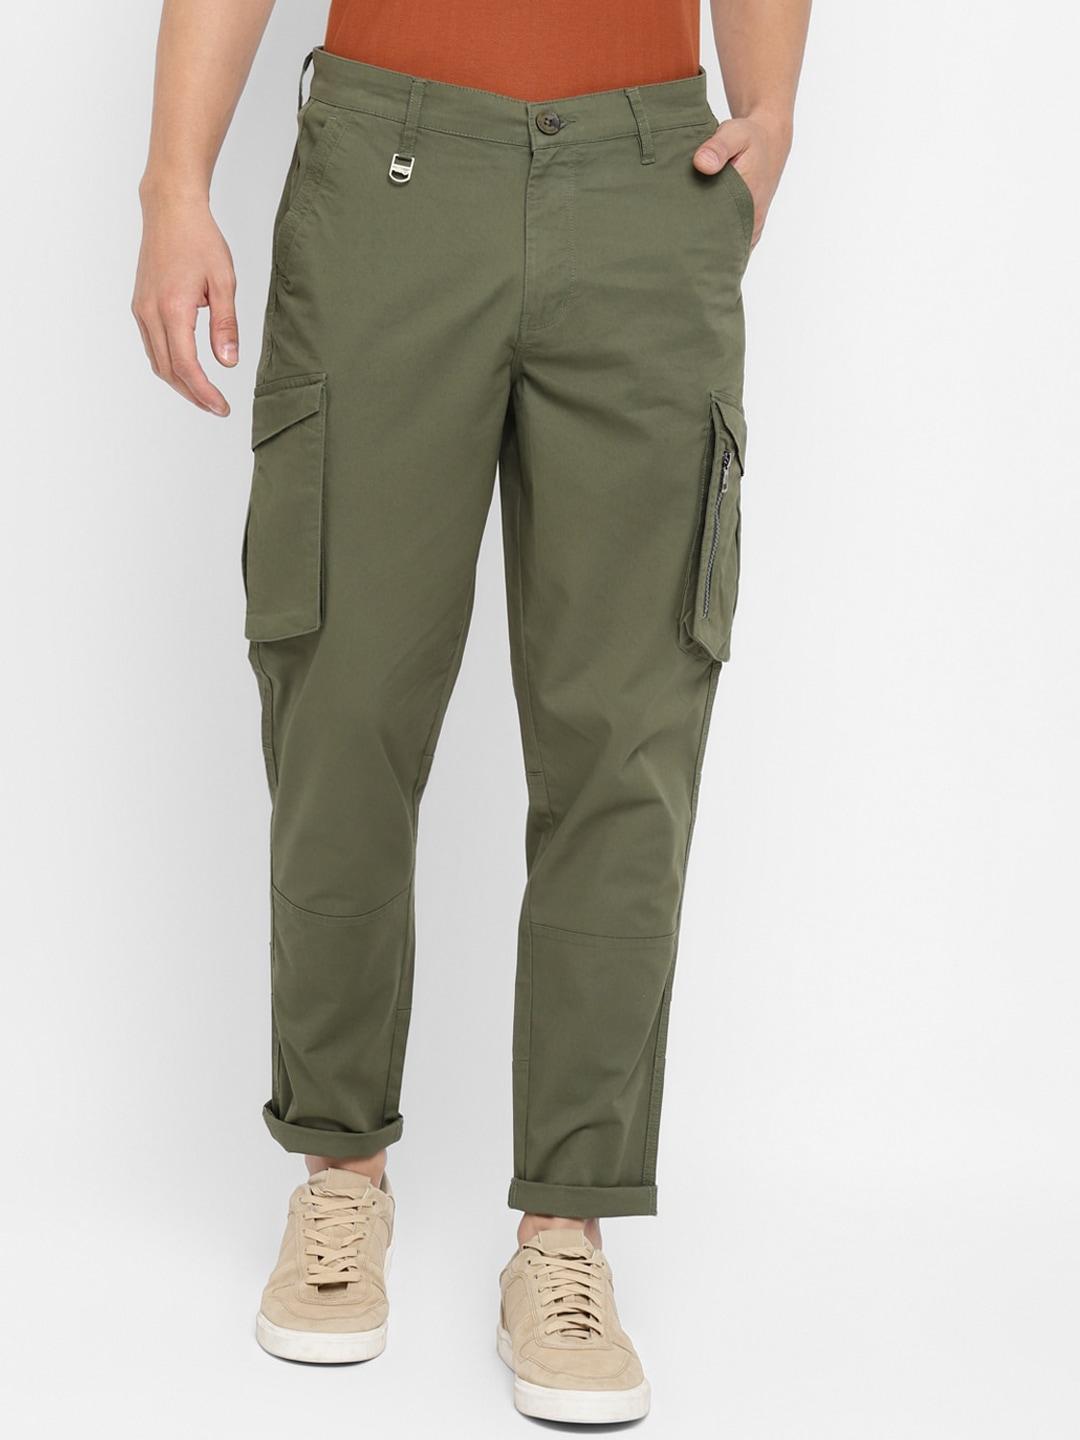 red-chief-men-cotton-cargos-trousers